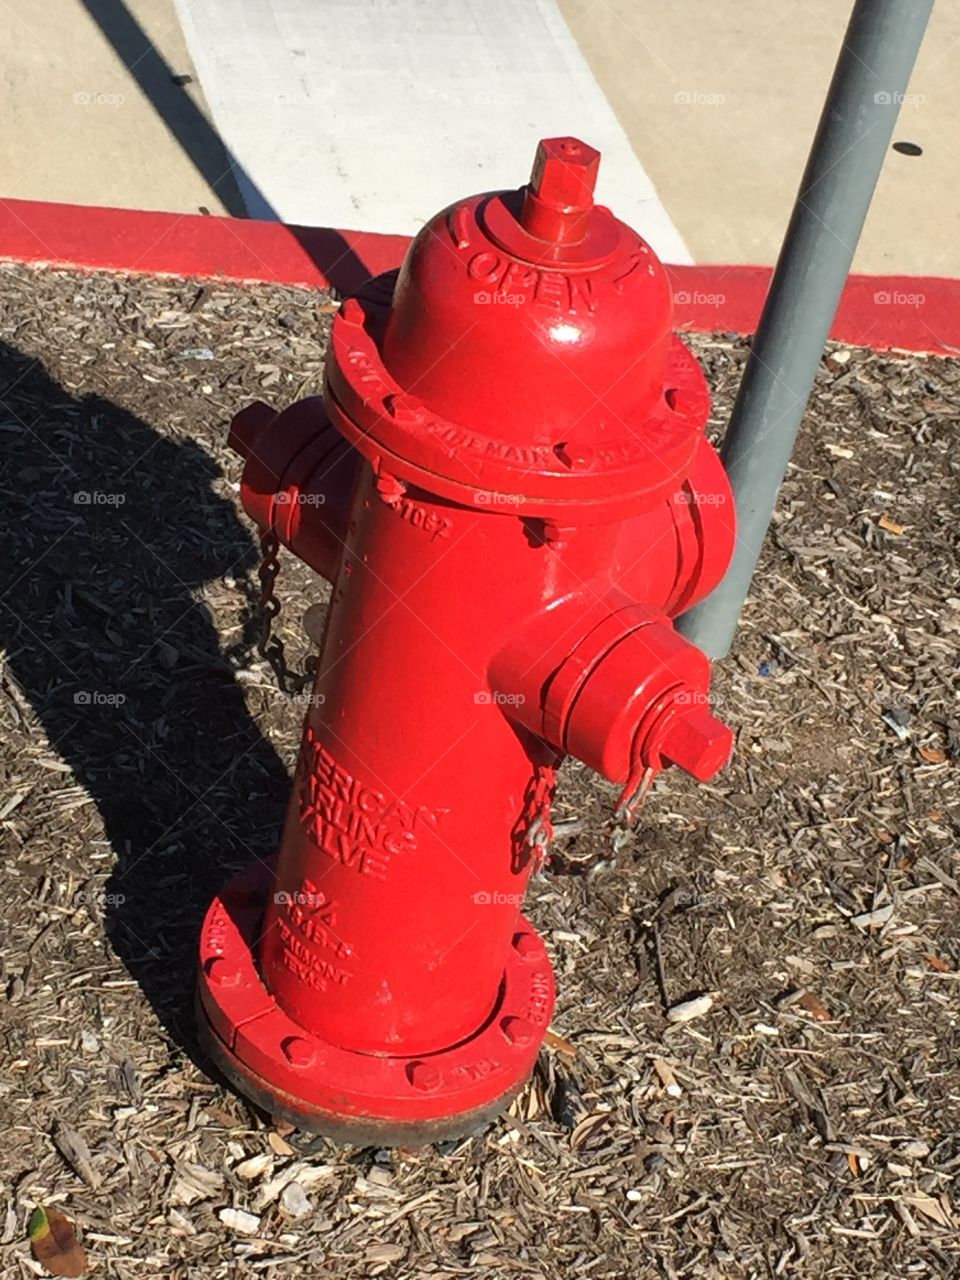 Vibrant fire hydrant in the sunlight.